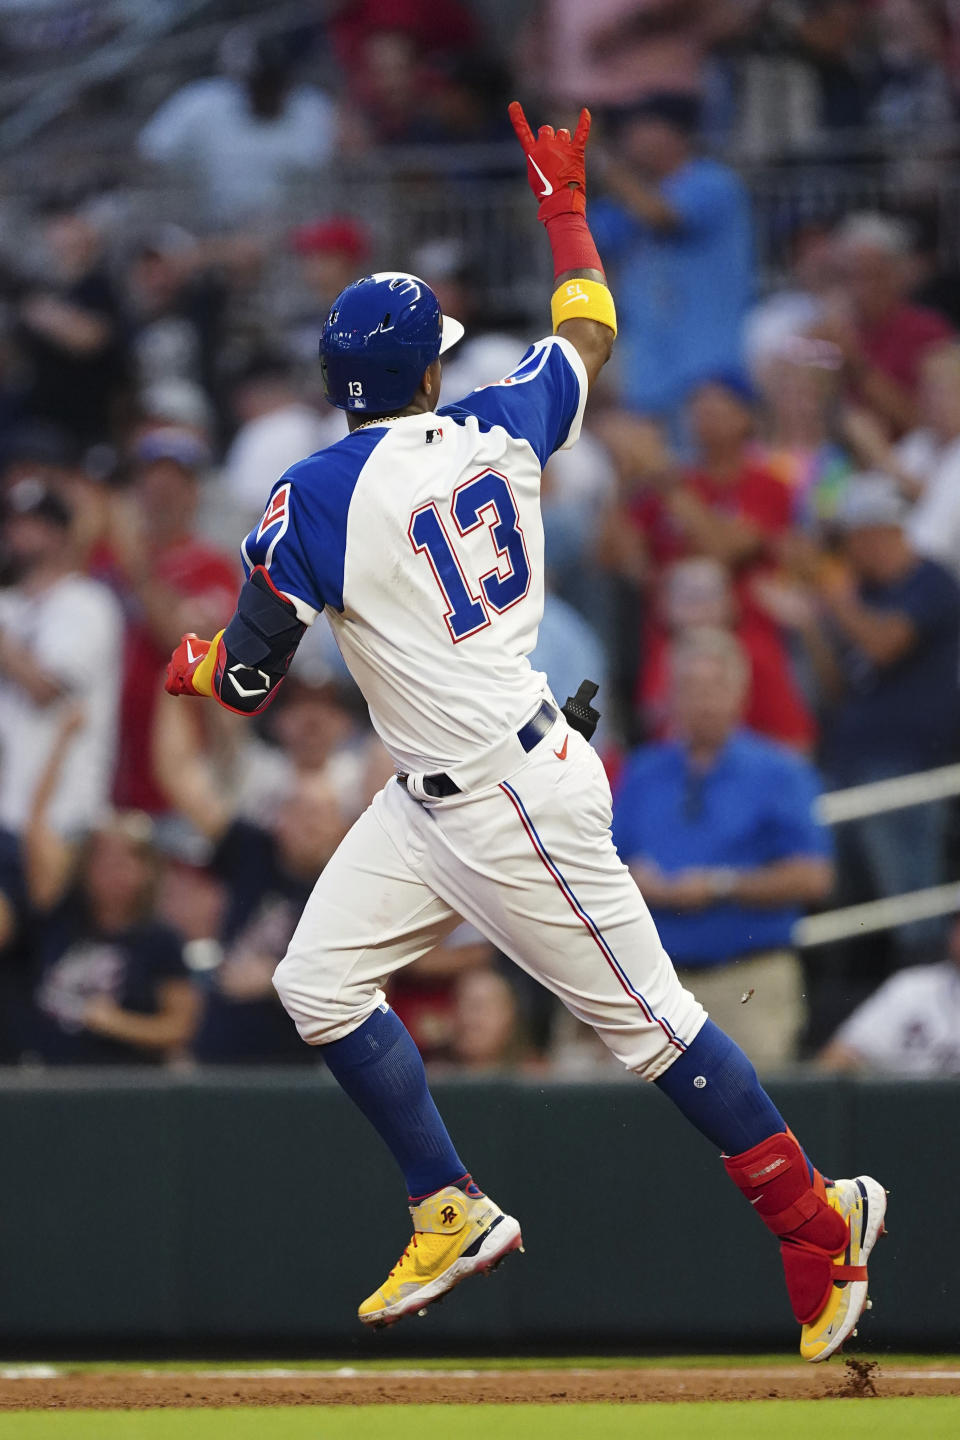 Atlanta Braves' Ronald Acuna Jr. gestures to the crowd as he runs the bases after hitting a home run during the fourth inning of the team's baseball game against the Milwaukee Brewers on Friday, May 6, 2022, in Atlanta. (AP Photo/John Bazemore)